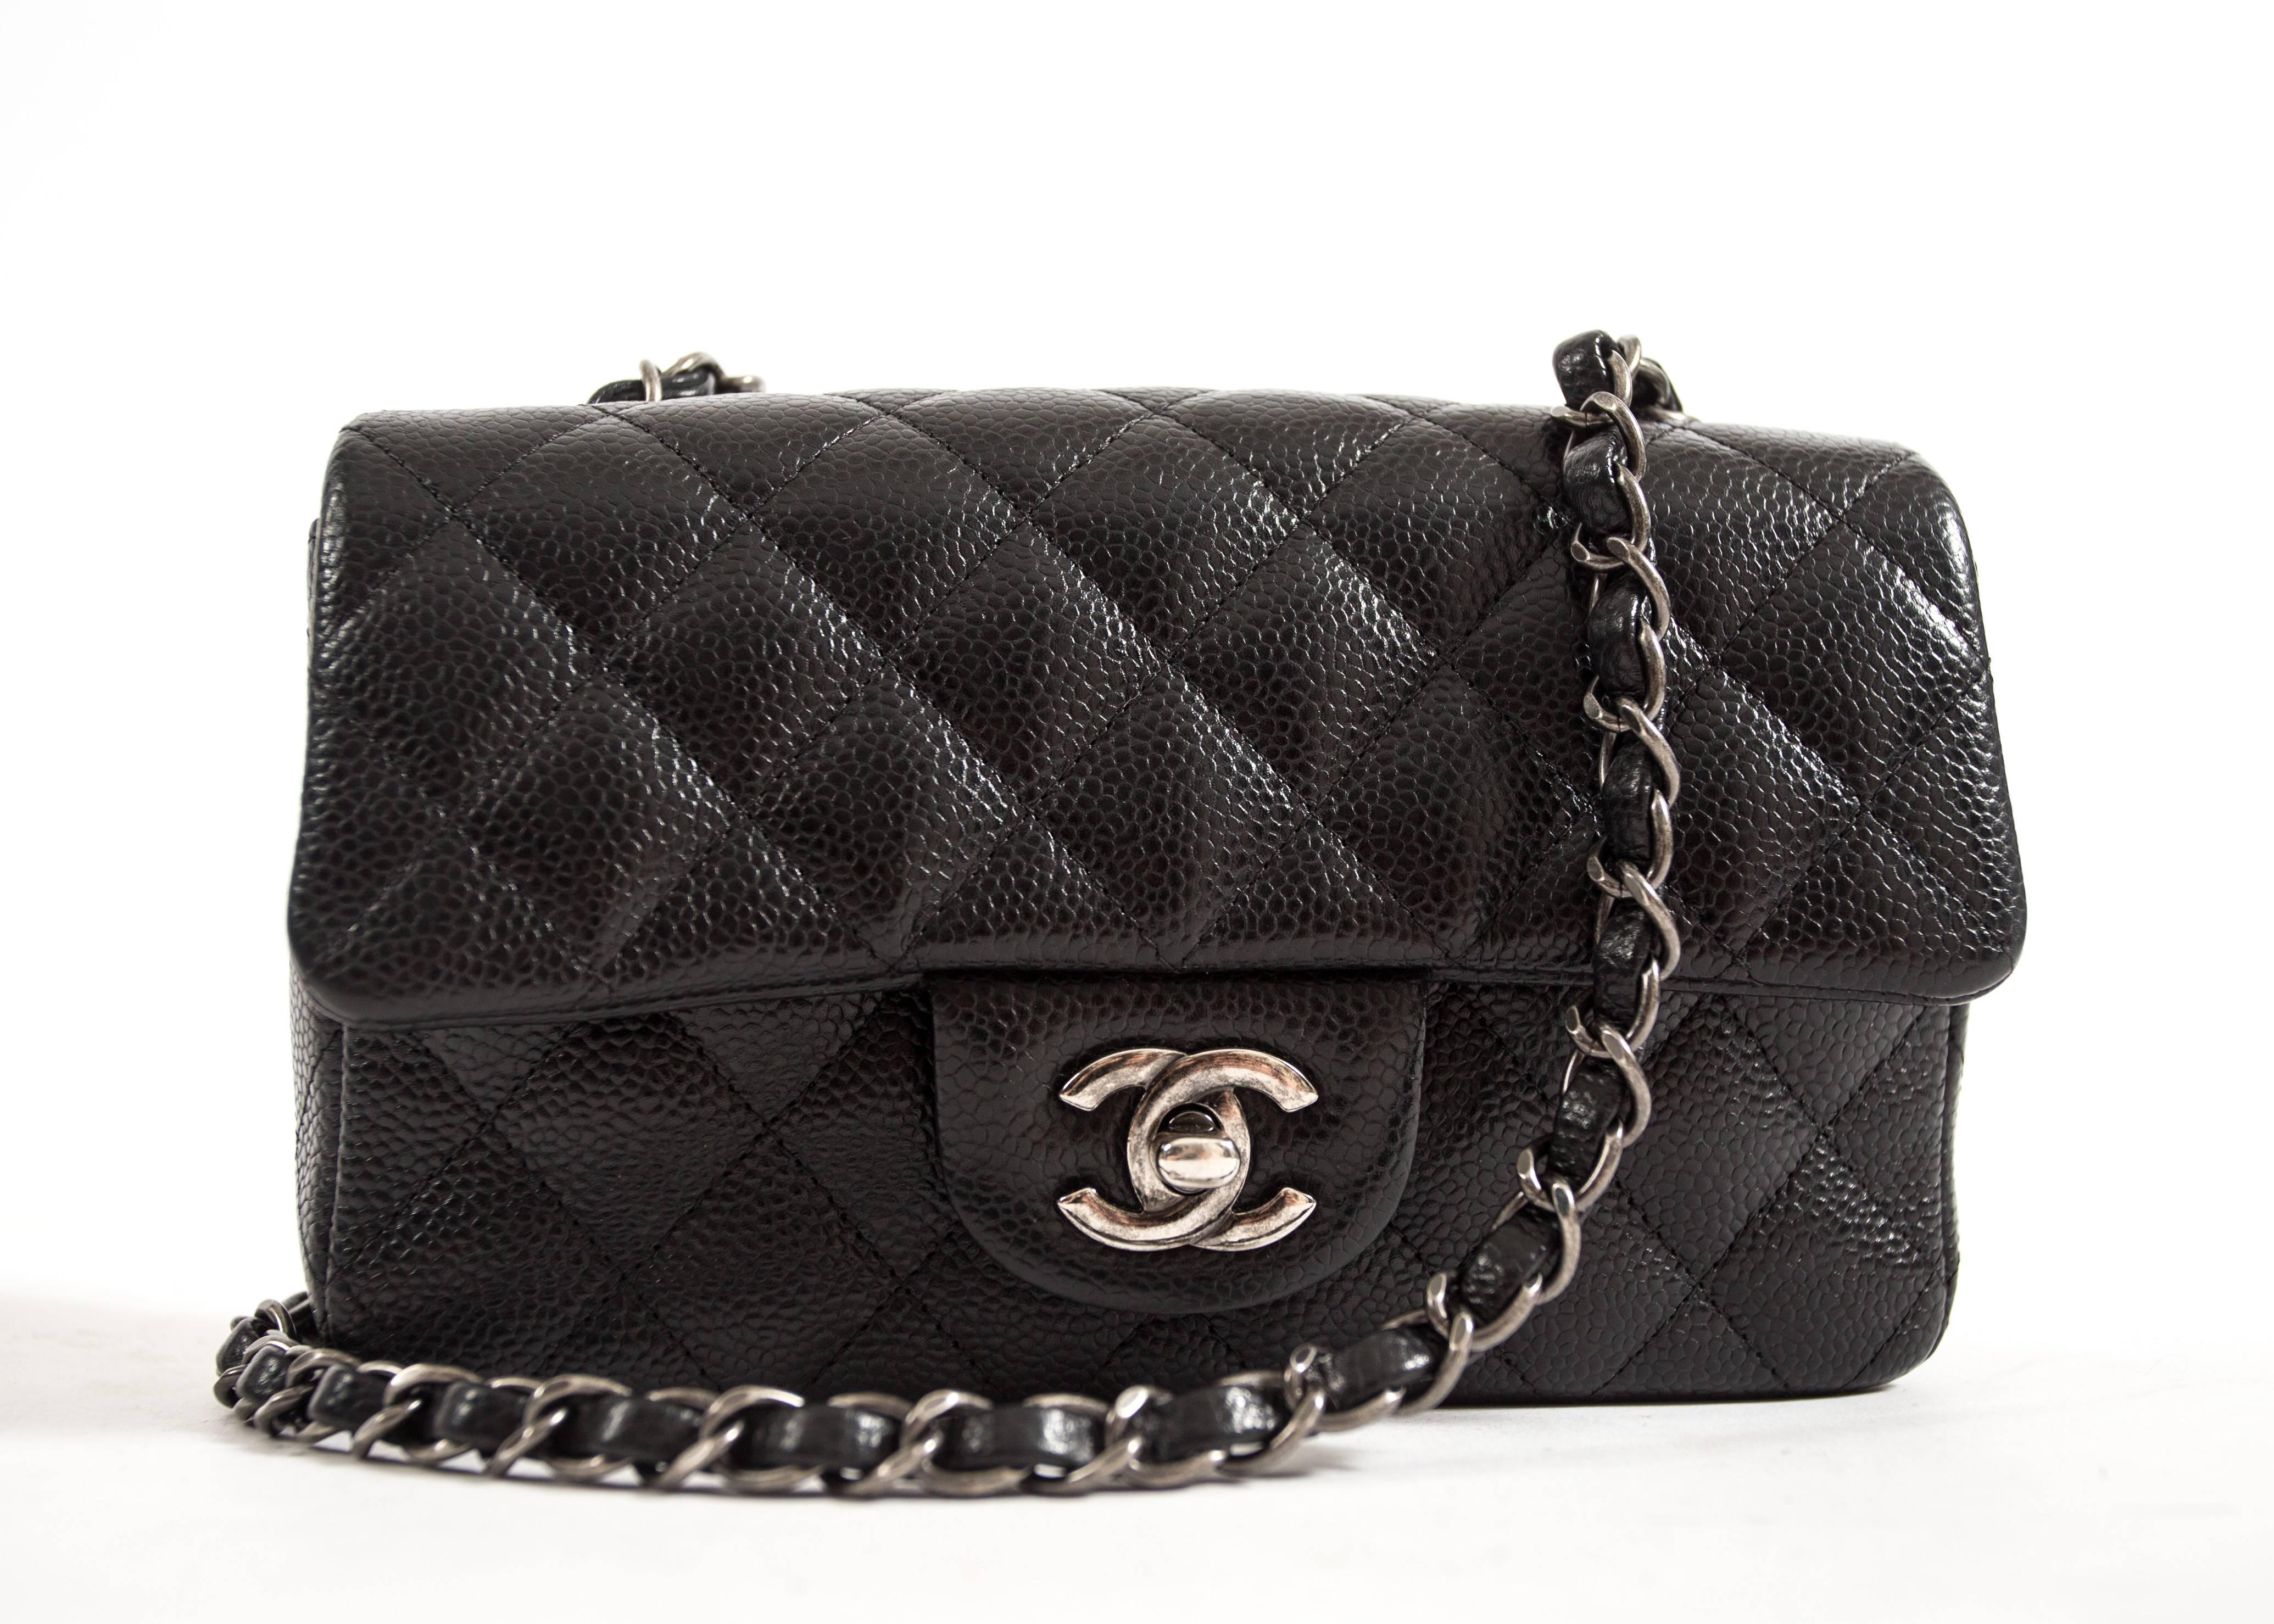 Chanel Black Caviar Mini Classic Crossbody Flap Bag

- Chanel Mini Flap bag of black caviar leather with aged ruthenium hardware.
 
- Front flap and with CC turn-lock closure, a half moon back pocket, and an interwoven chain link with black leather